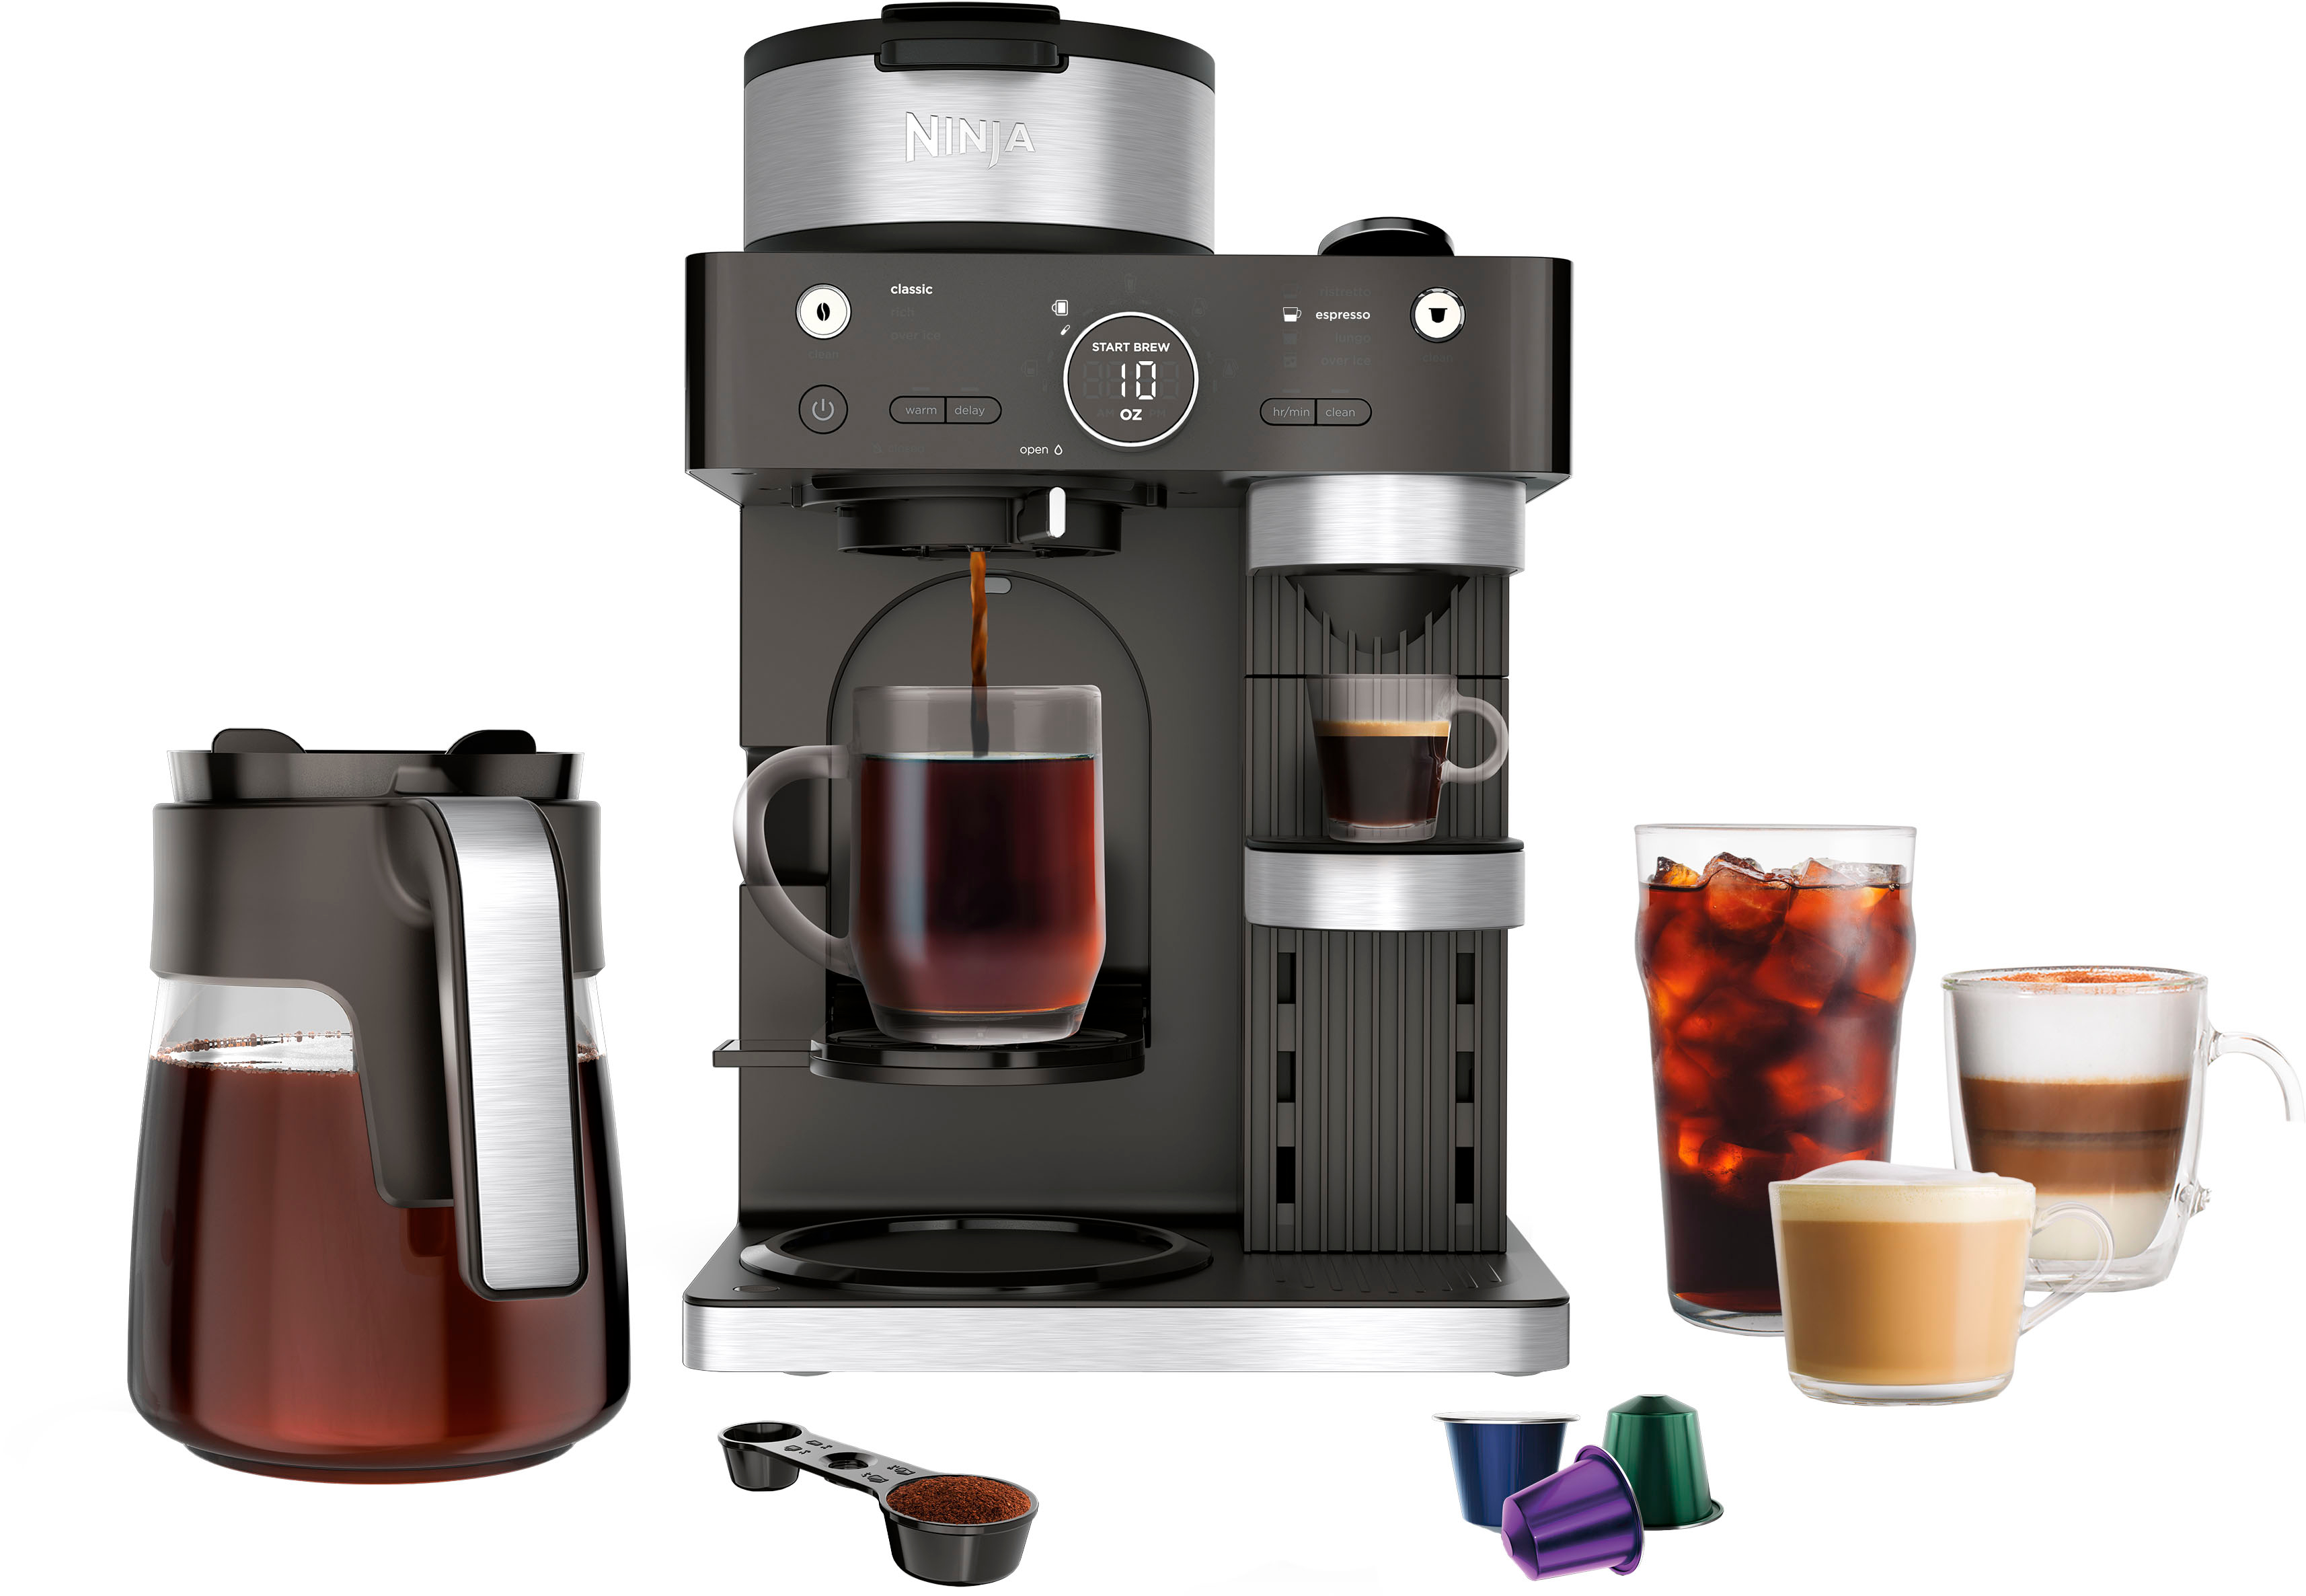 Ninja CFN601 Single Serve Espresso & Coffee Barista System w/Built-in Frother (Coffee and Nespresso Capsule Compatible) $180 + Free Shipping